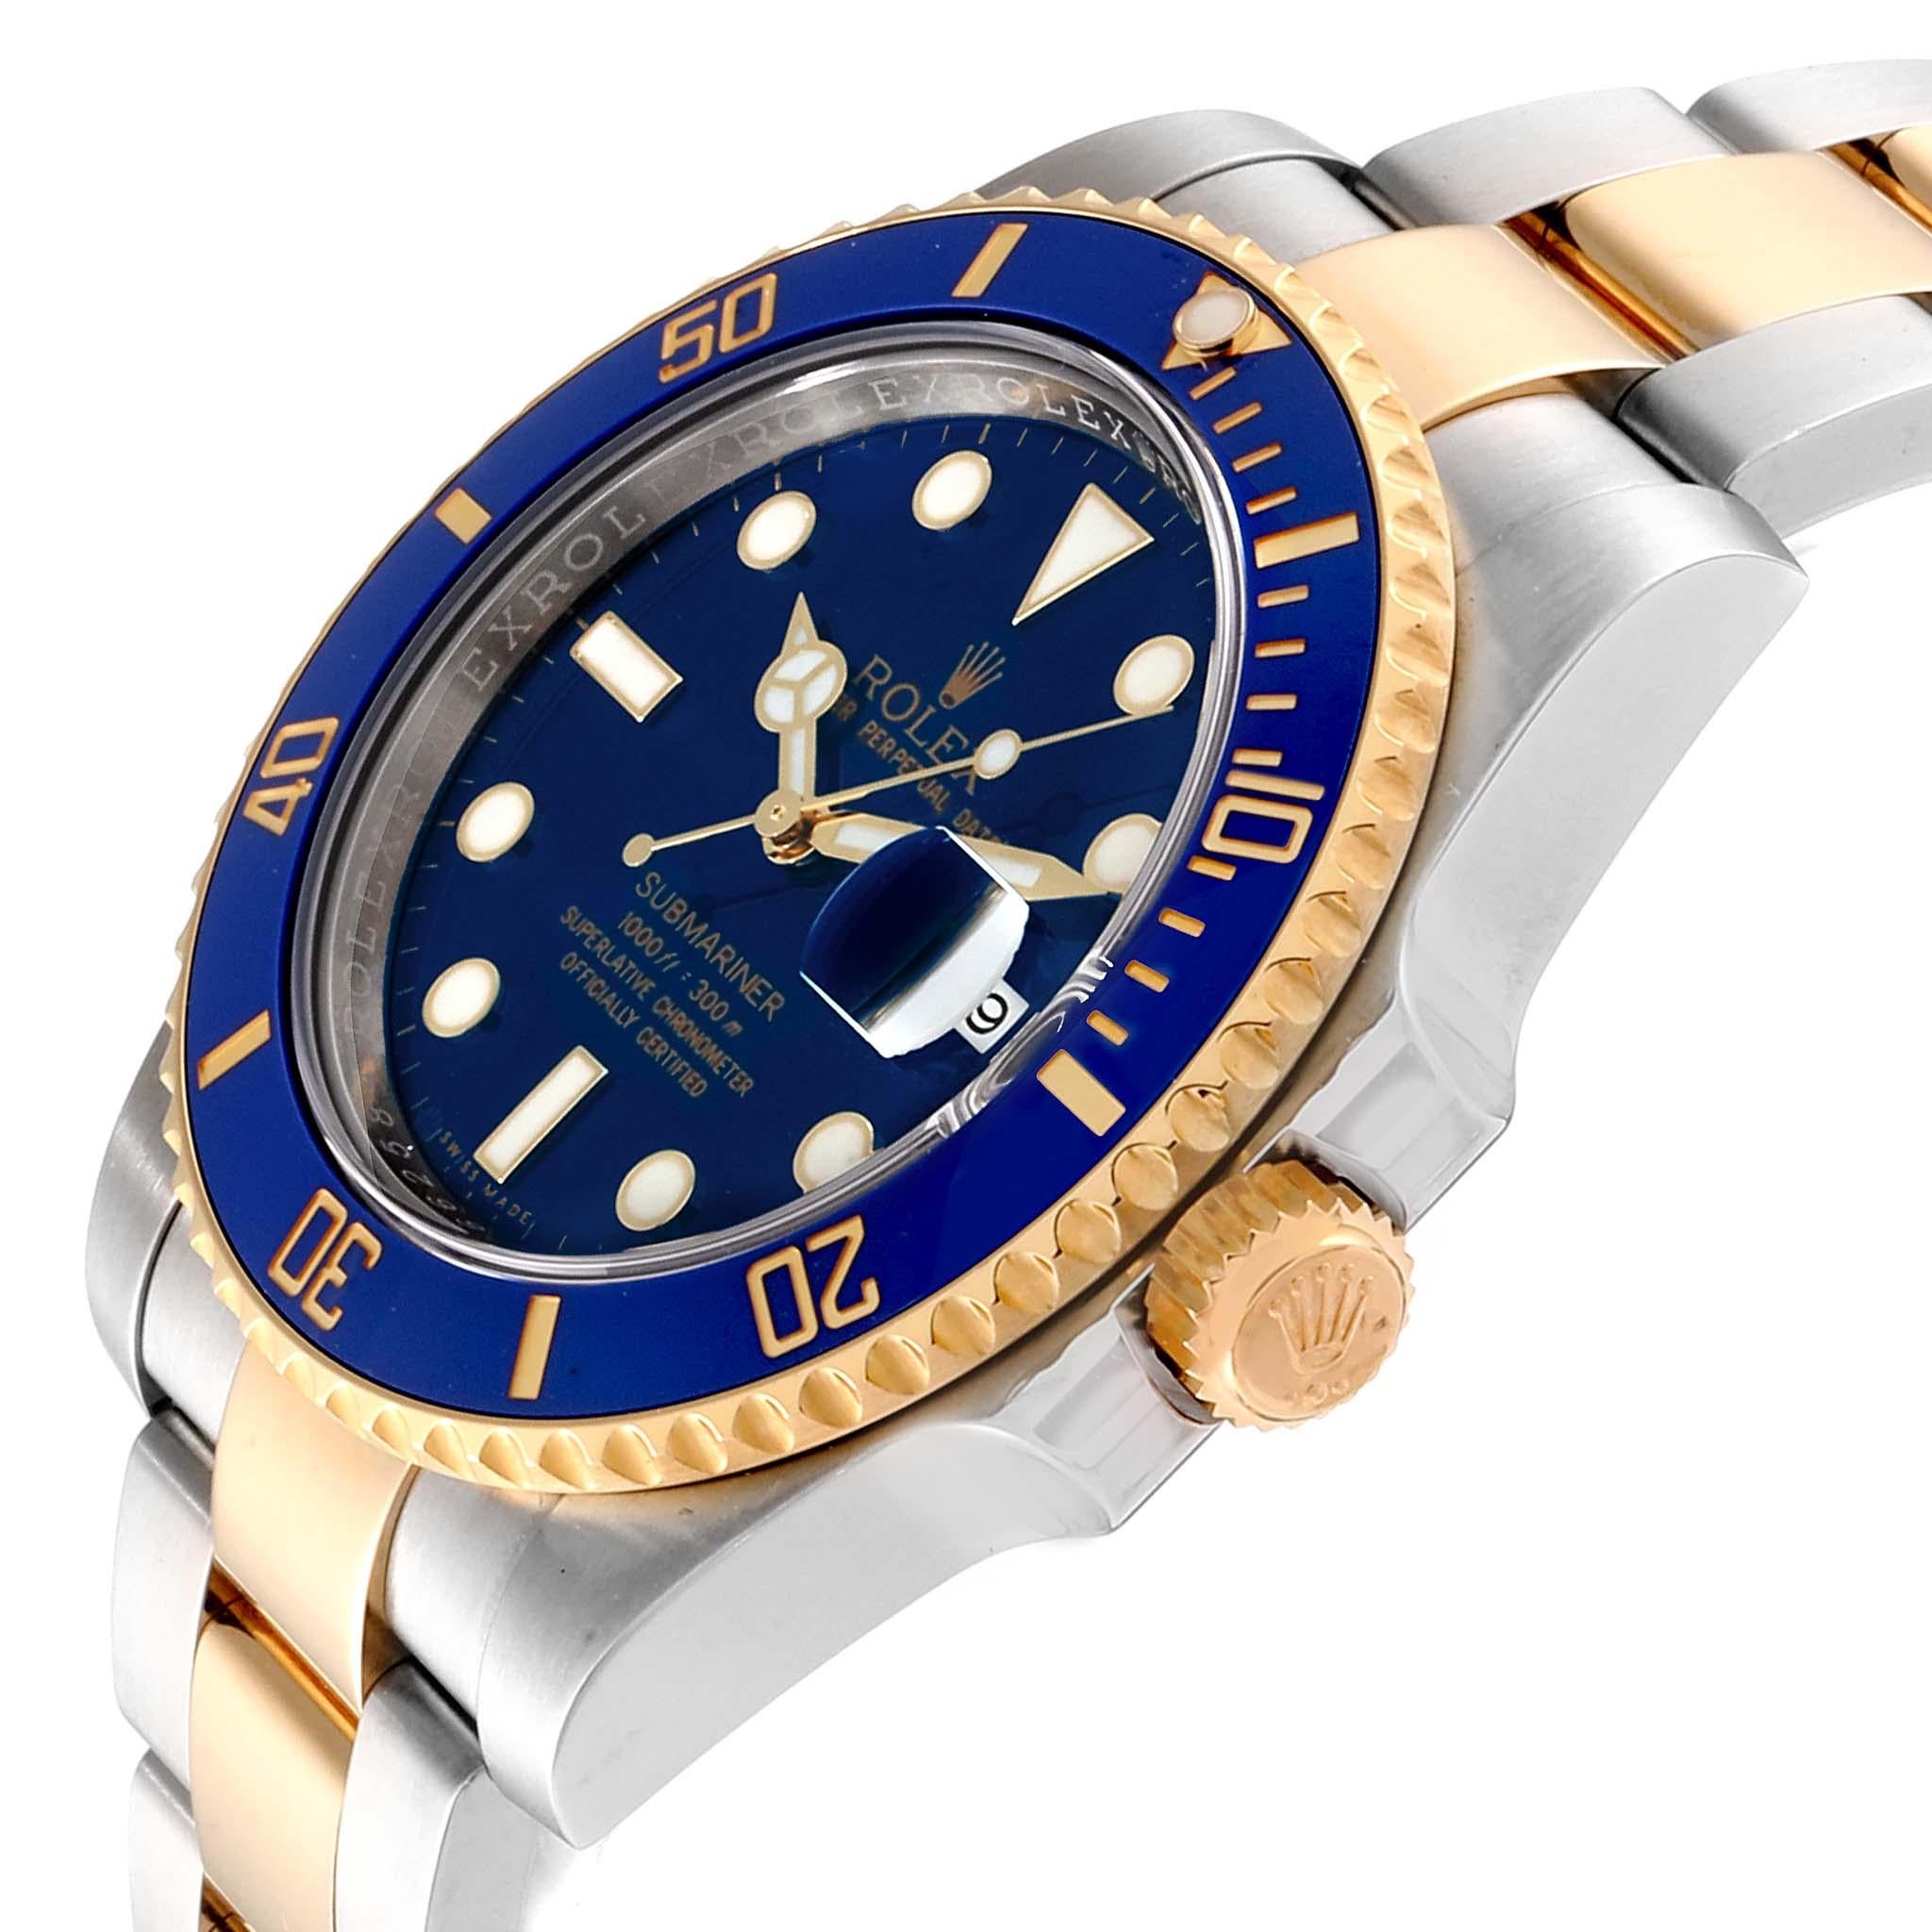 Rolex Submariner Blue Dial Steel Yellow Gold Men's Watch 116613 Box Card For Sale 2